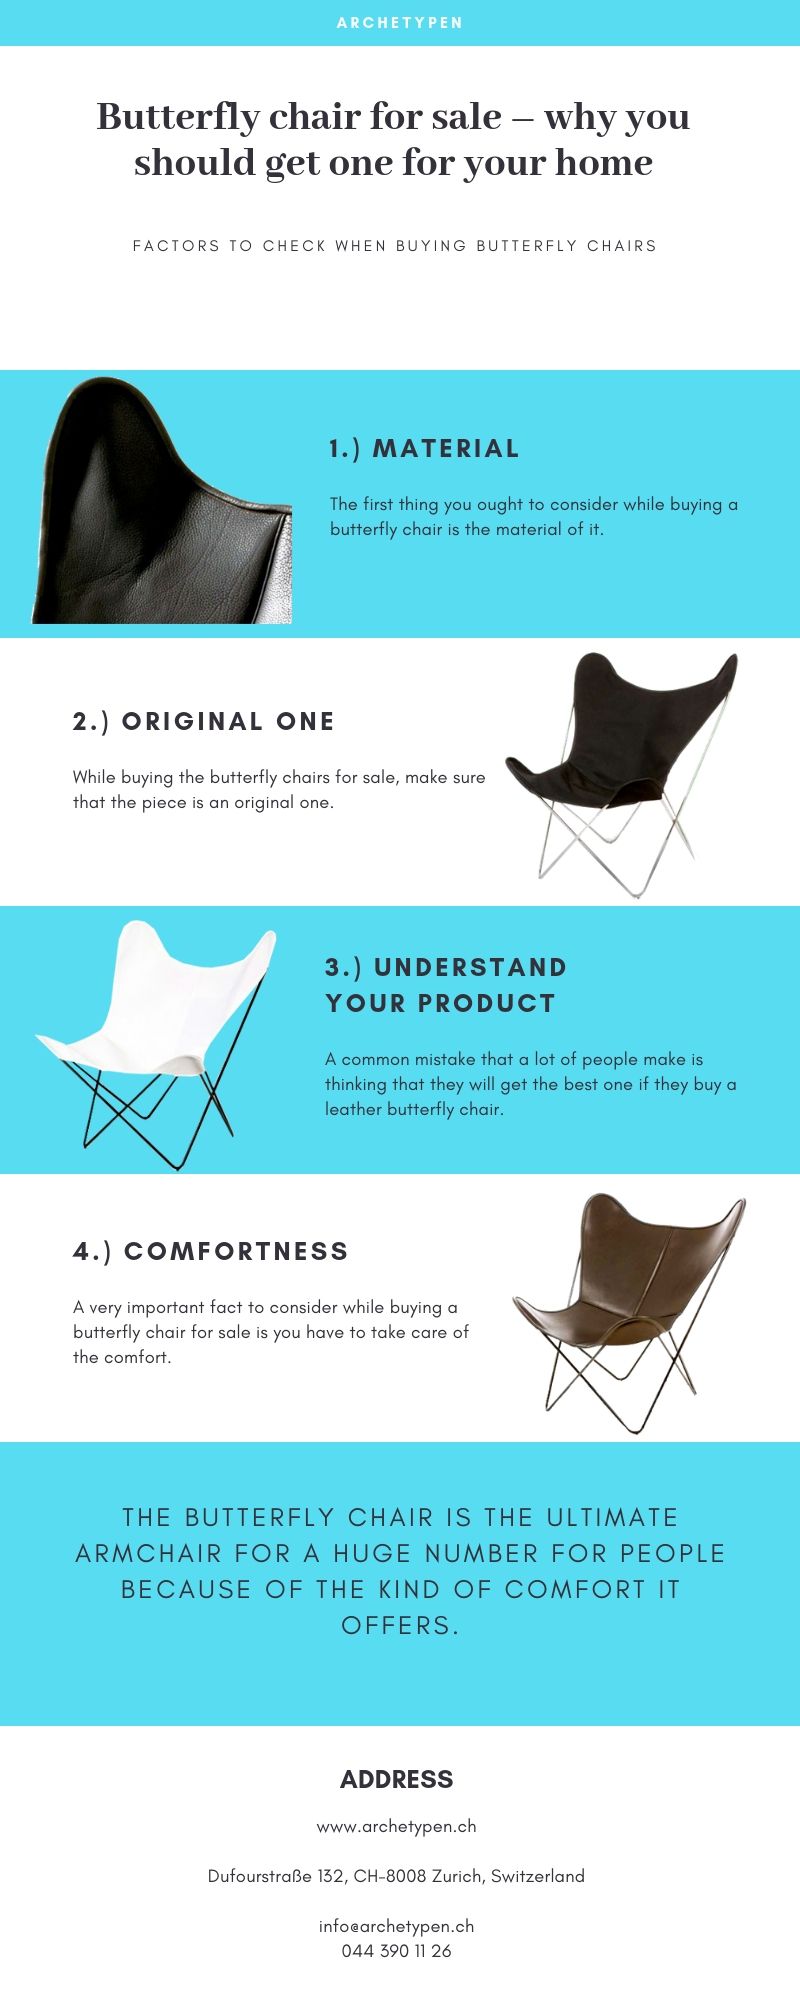 Butterfly chair for sale – why you should get one for your home.jpg When you have planned to get the butterfly chair for sale, there are a lot of factors you have to consider, especially if this is the first time you are buying it.
. For more details, visit- https://go2article.com/article/why-you-should-get-butterfly-cha by archetypen